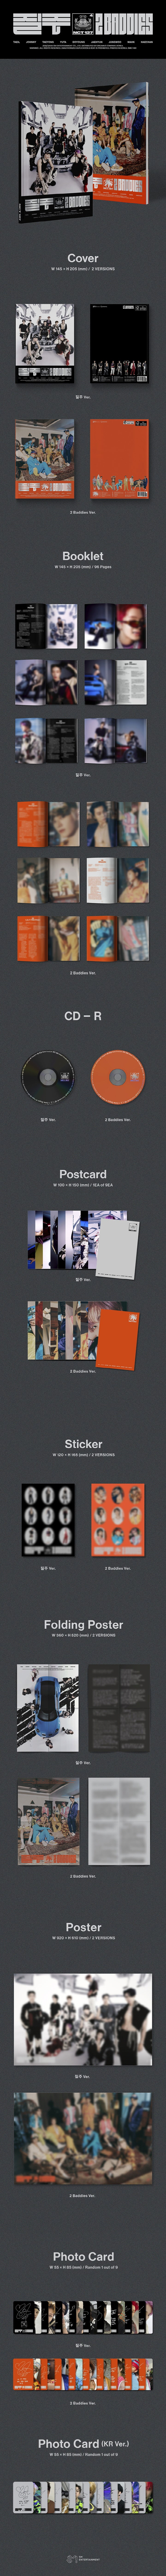 1 CD
1 Booklet (96 pages)
1 Postcard (random out of 9 types)
1 Sticker
1 Folding Poster
1 Photo Card (random out of 9 types)